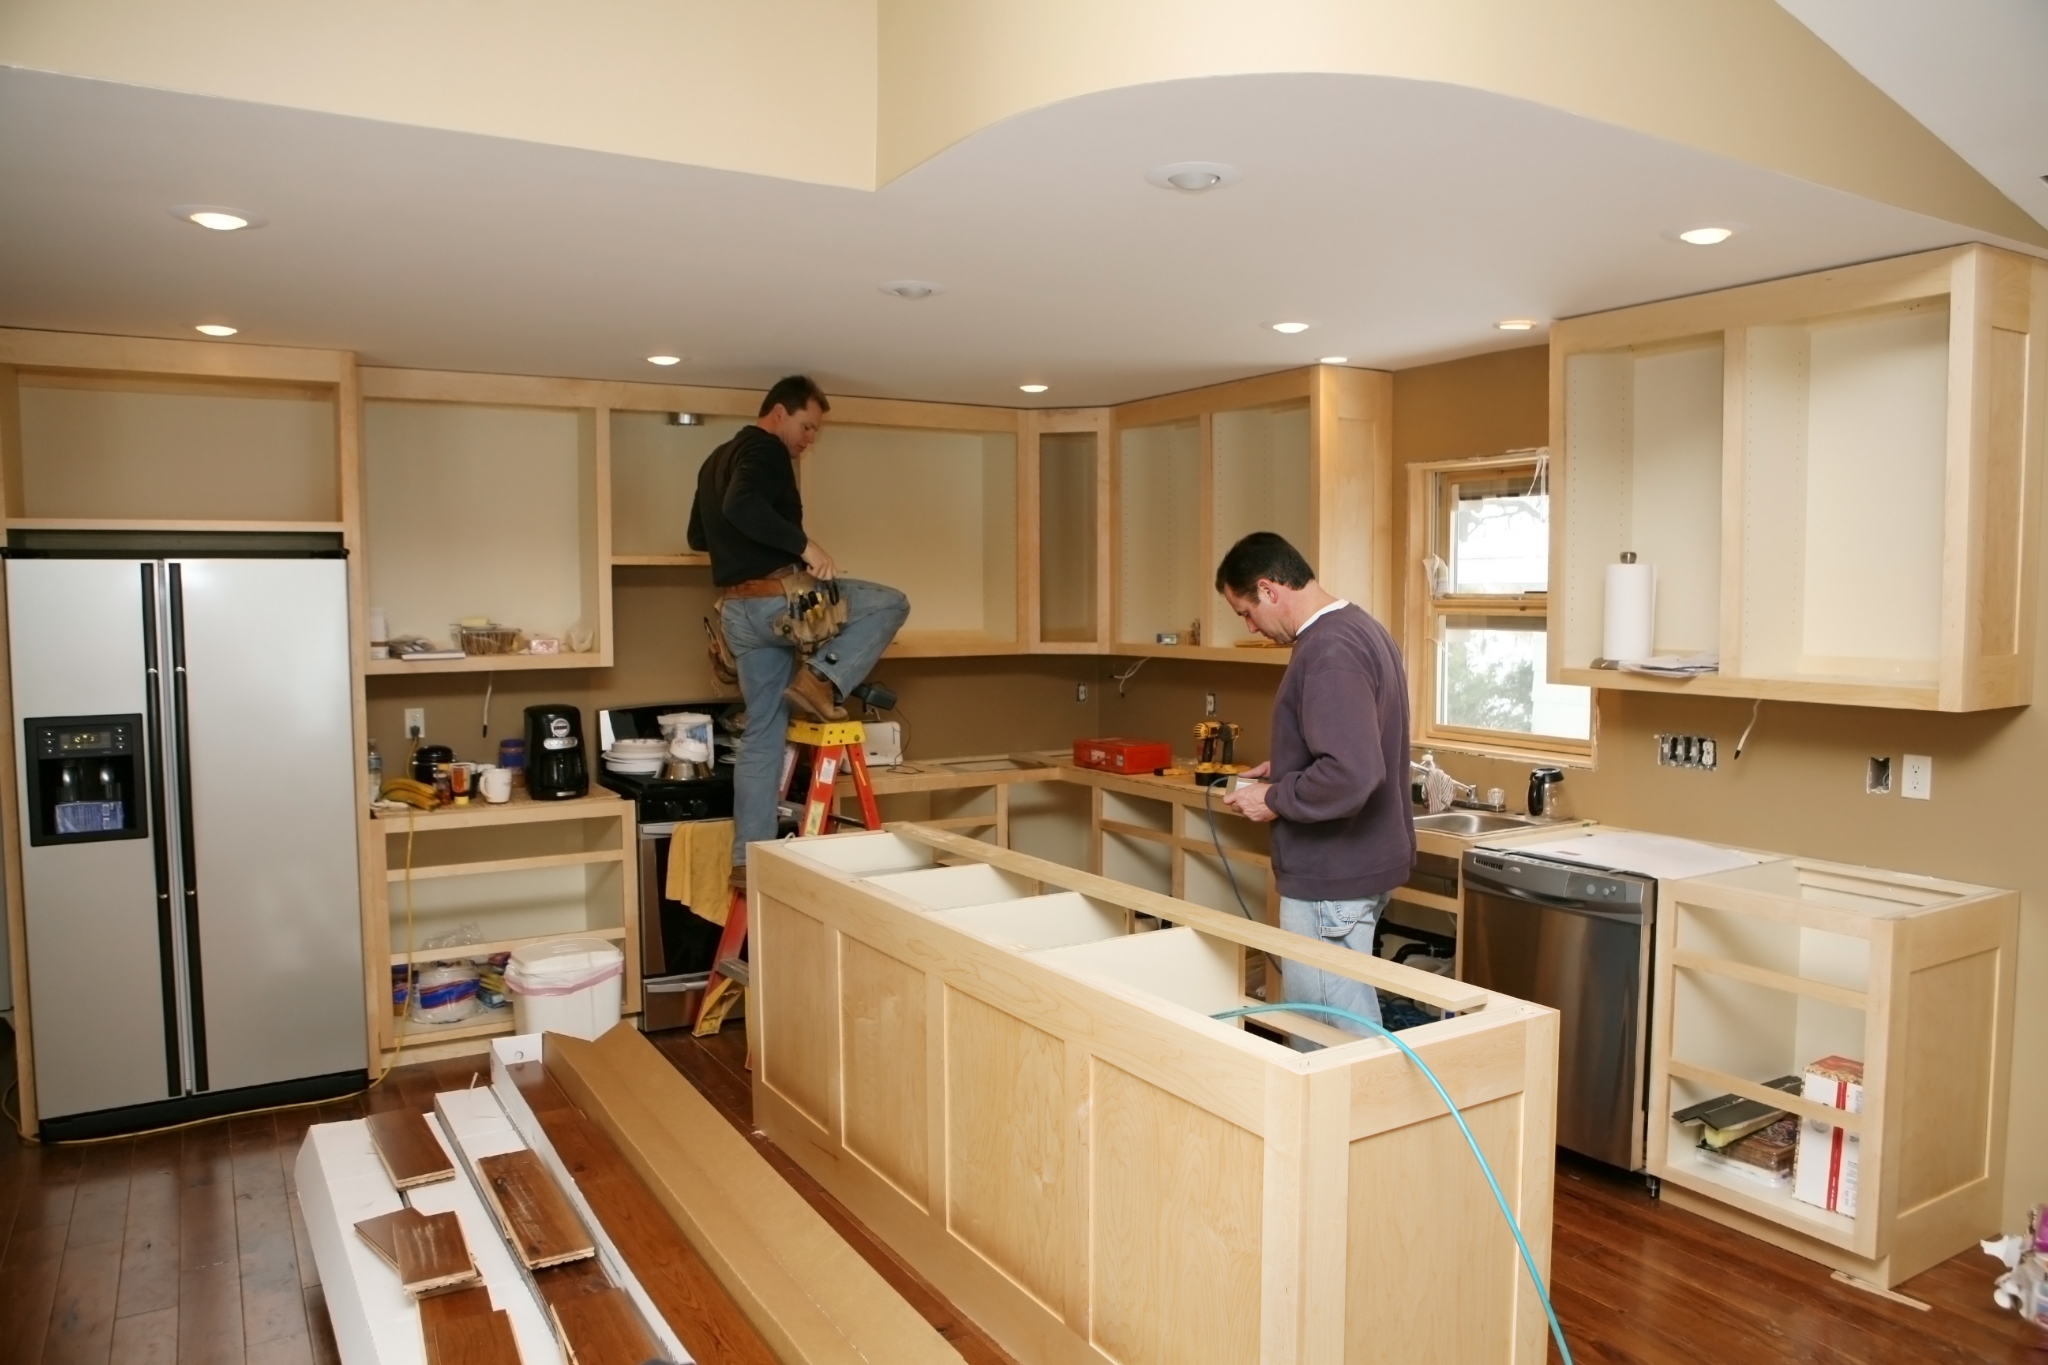 Kitchen Remodel Return On Investment, How Much Does It Cost To Remodel A Kitchen